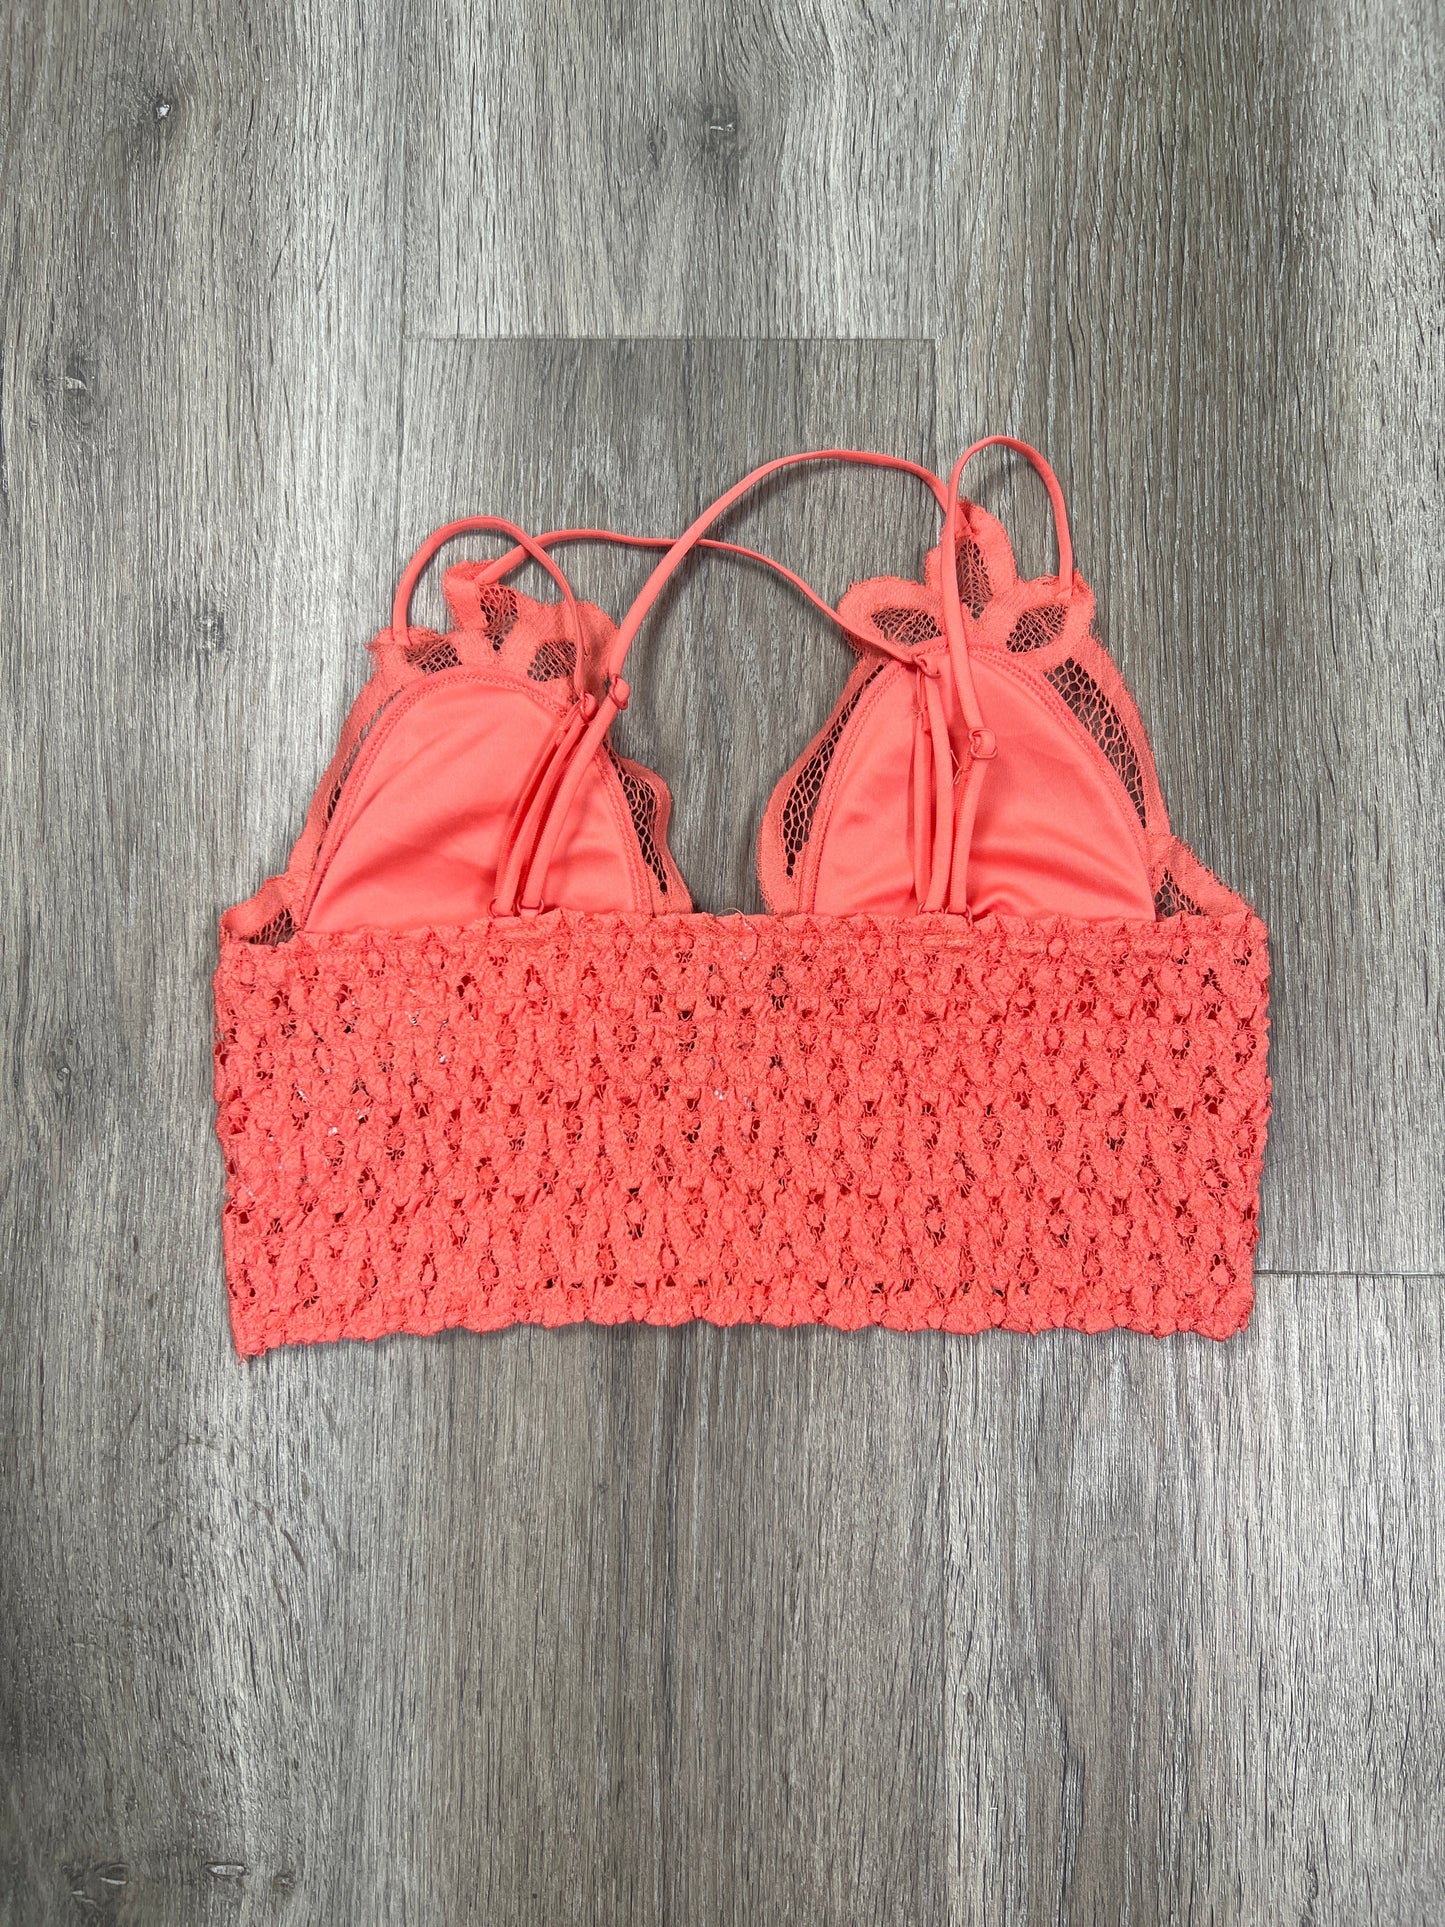 Bralette By Zenana Outfitters  Size: M